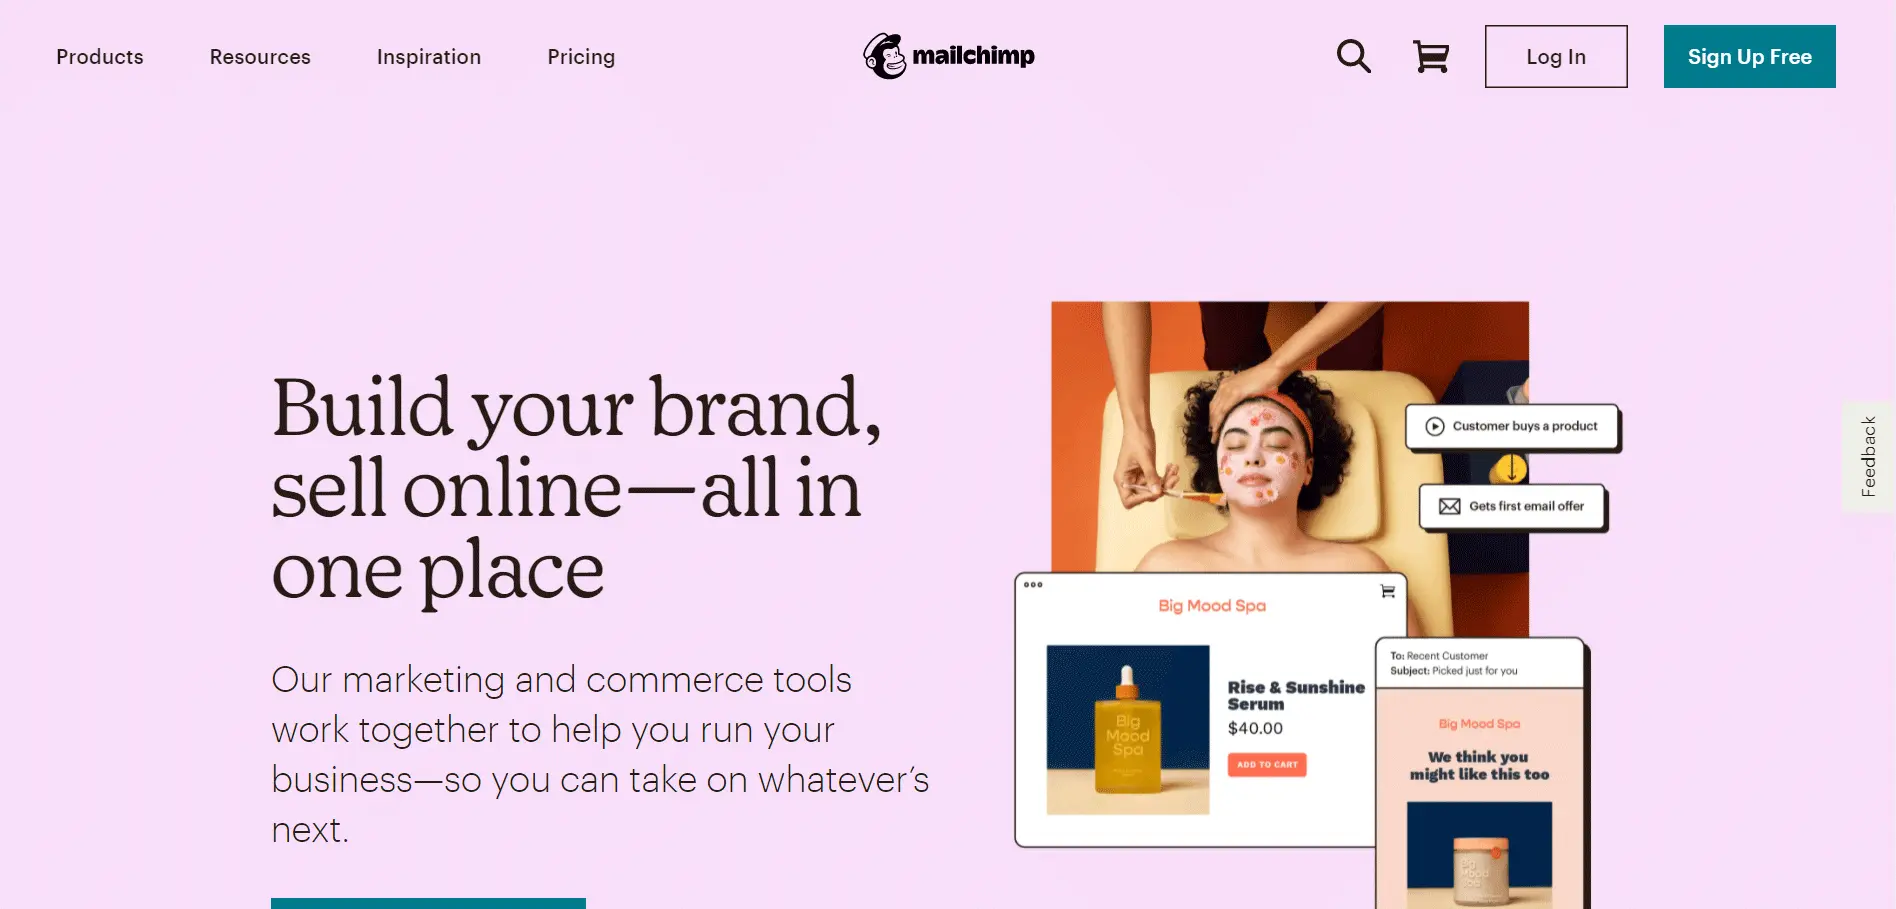 This is the screenshot of the mailchimp website . It is one of the oldest and the finest email marketing tools. The brand has become synonymous to email marketing